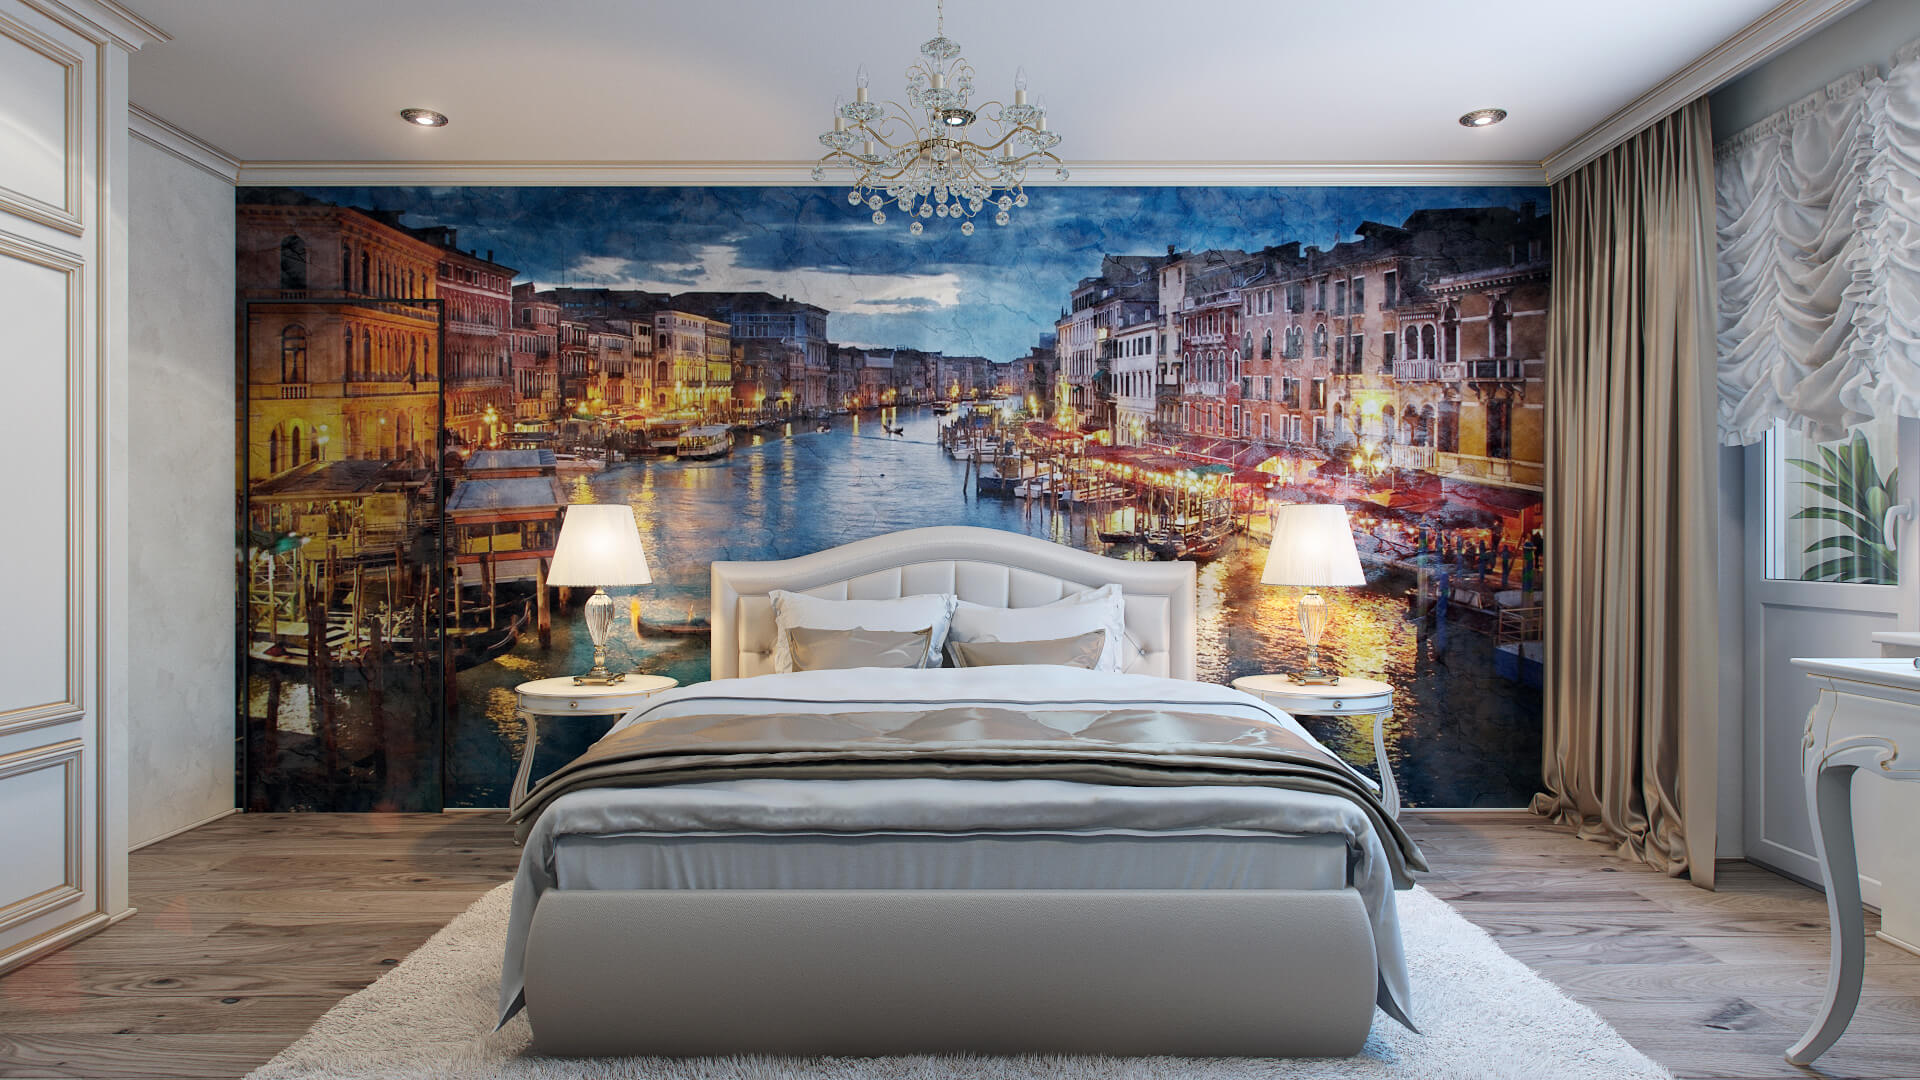 Bedroom design with large decorative painting on the wall